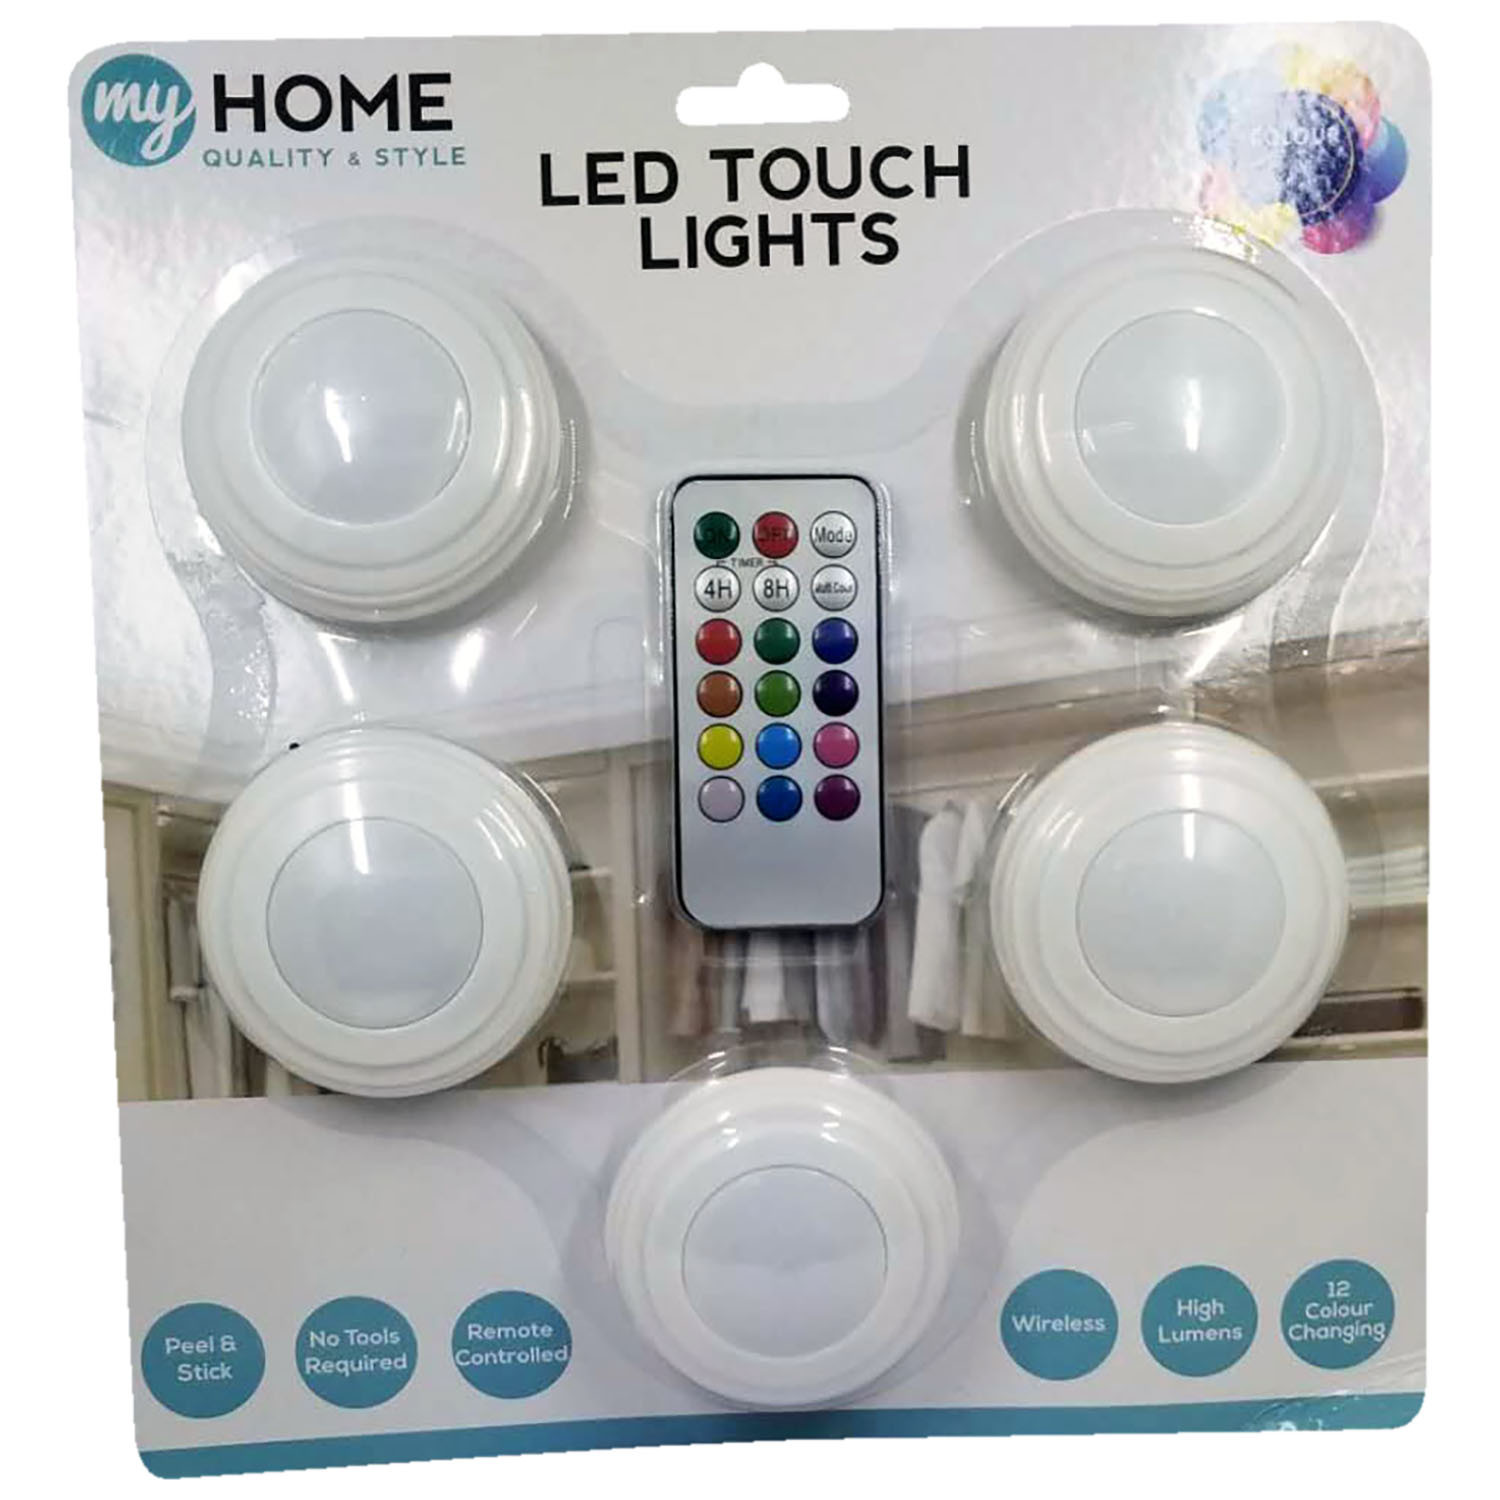 My Home LED Touch Lights with Remote 5 Pack Image